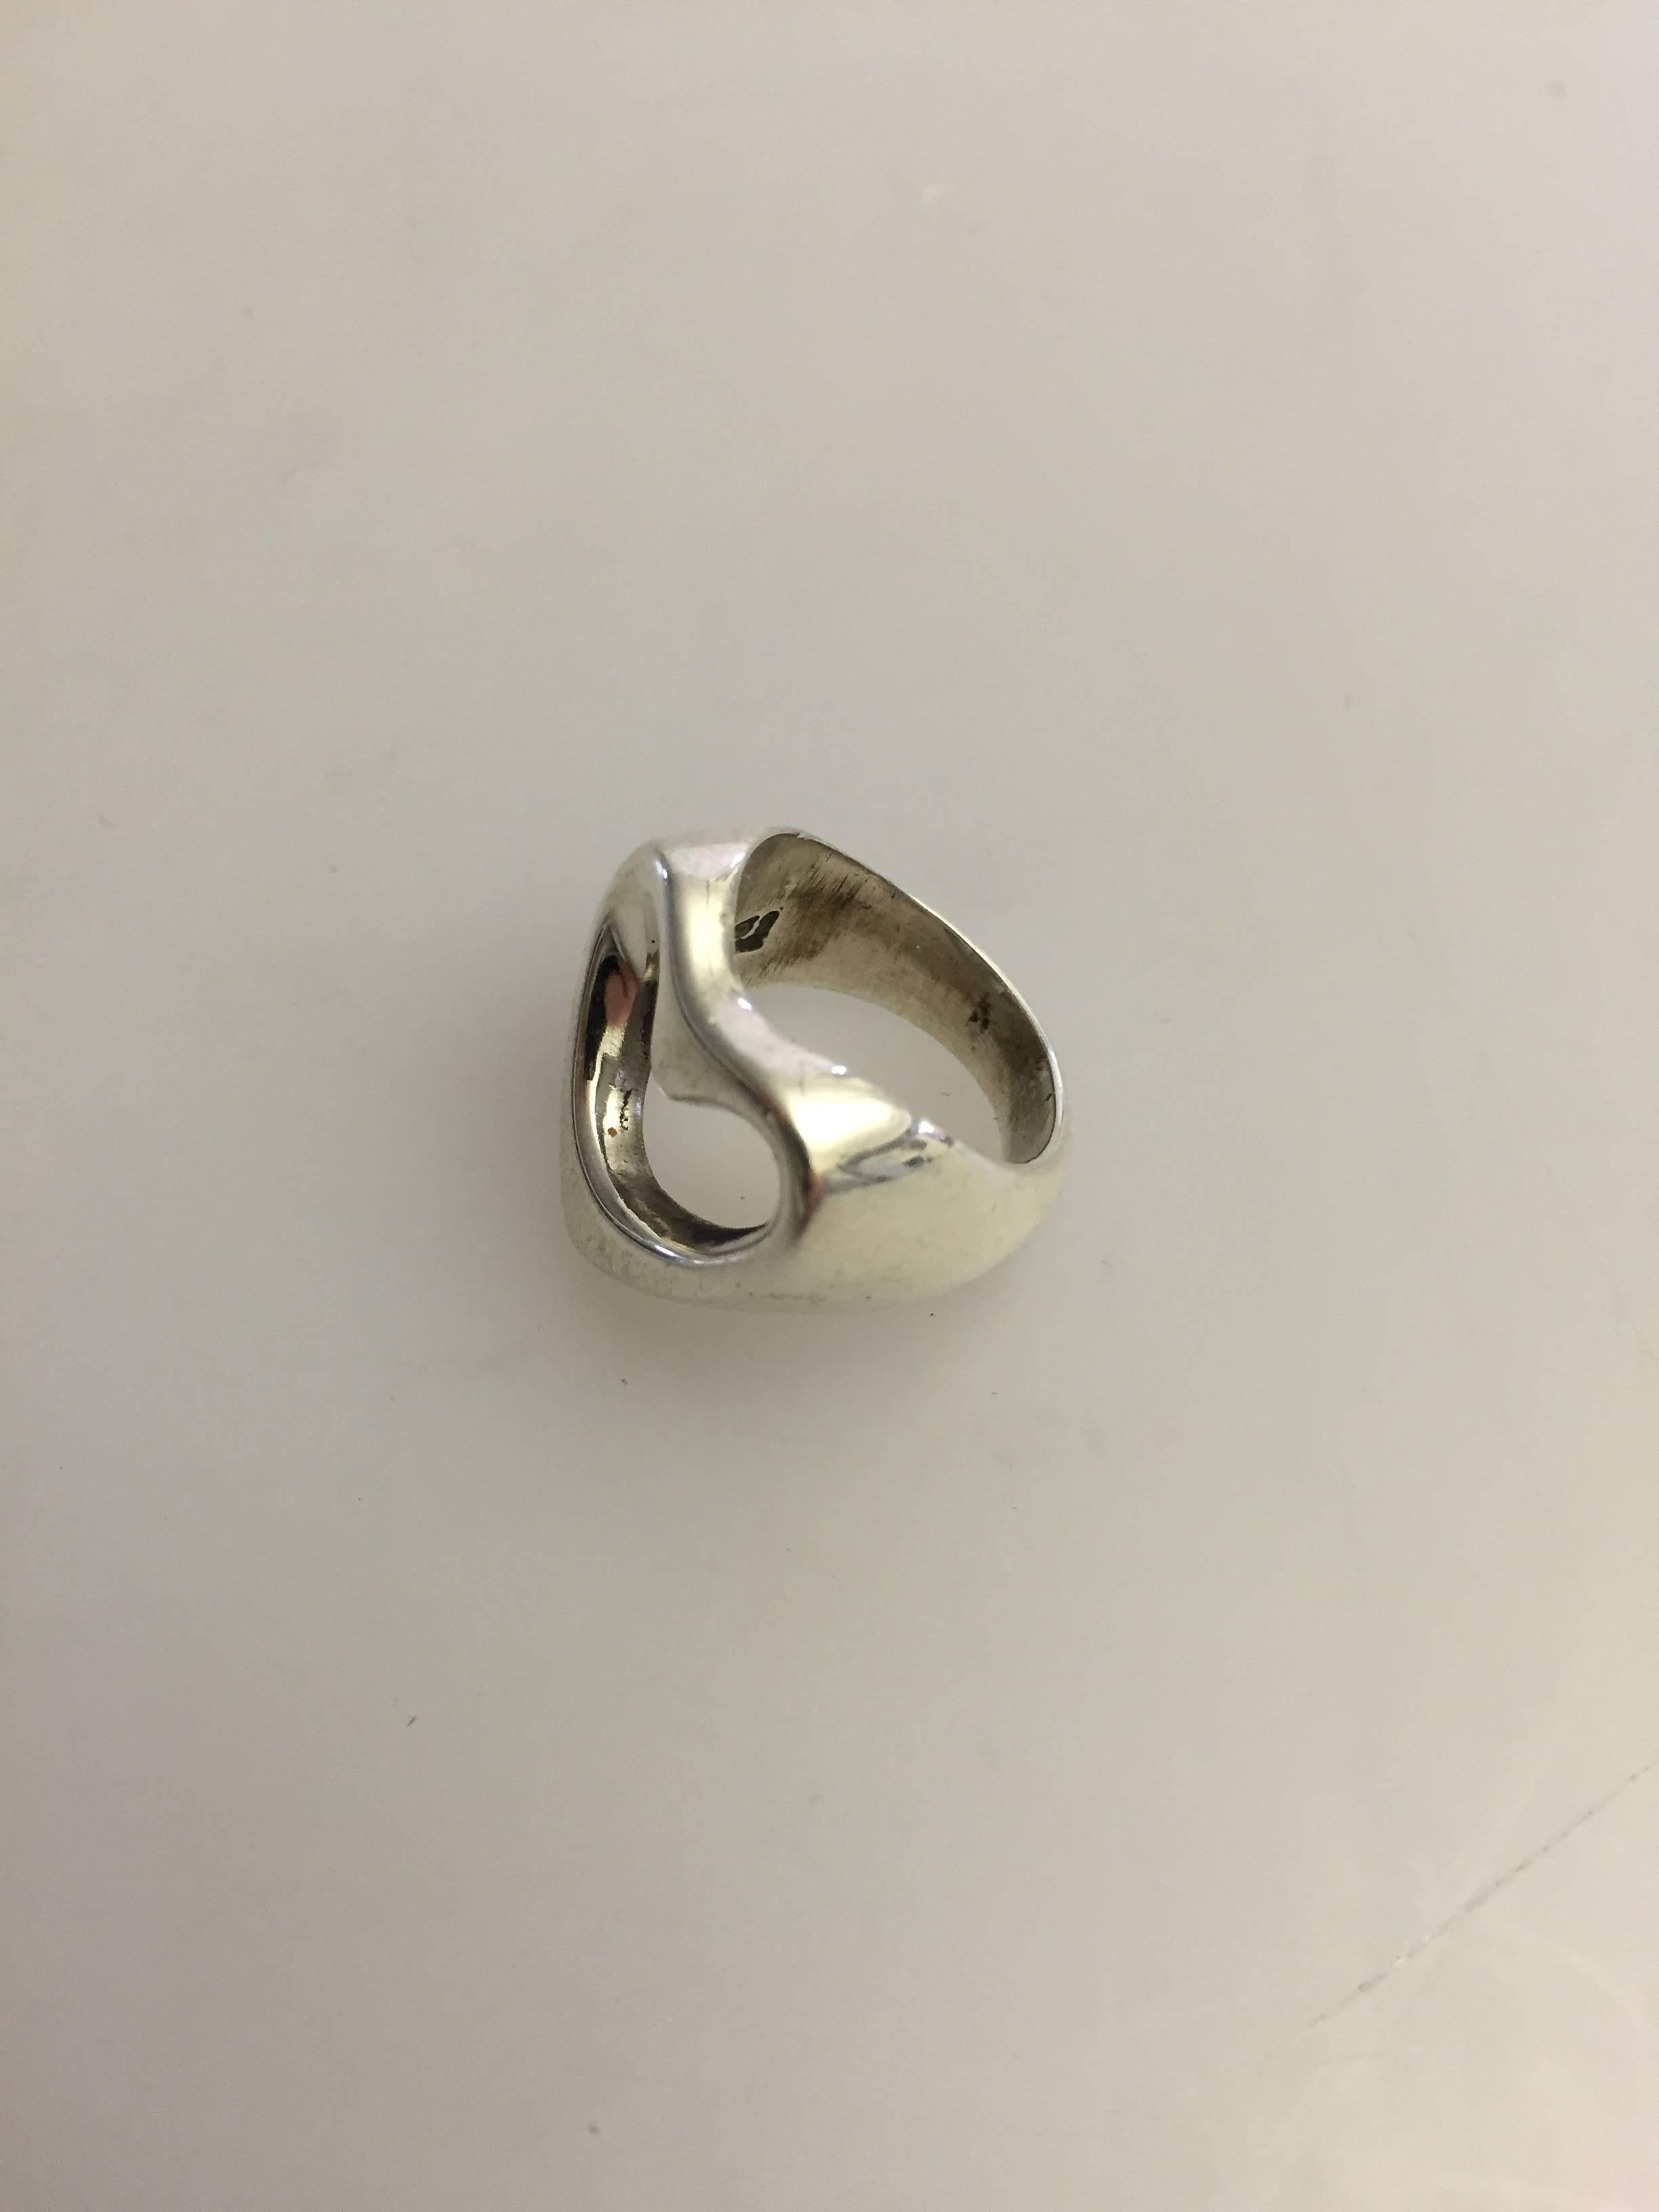 Georg Jensen sterling silver heart ring #193 designed by Henning Koppel.

 Size 45 and size 42.
 Vejer 8.9 g / 0.31 oz.

Henning Koppels (1918-1981) modern designs broke new ground for Georg Jensen. His designs were constructed in clean lines